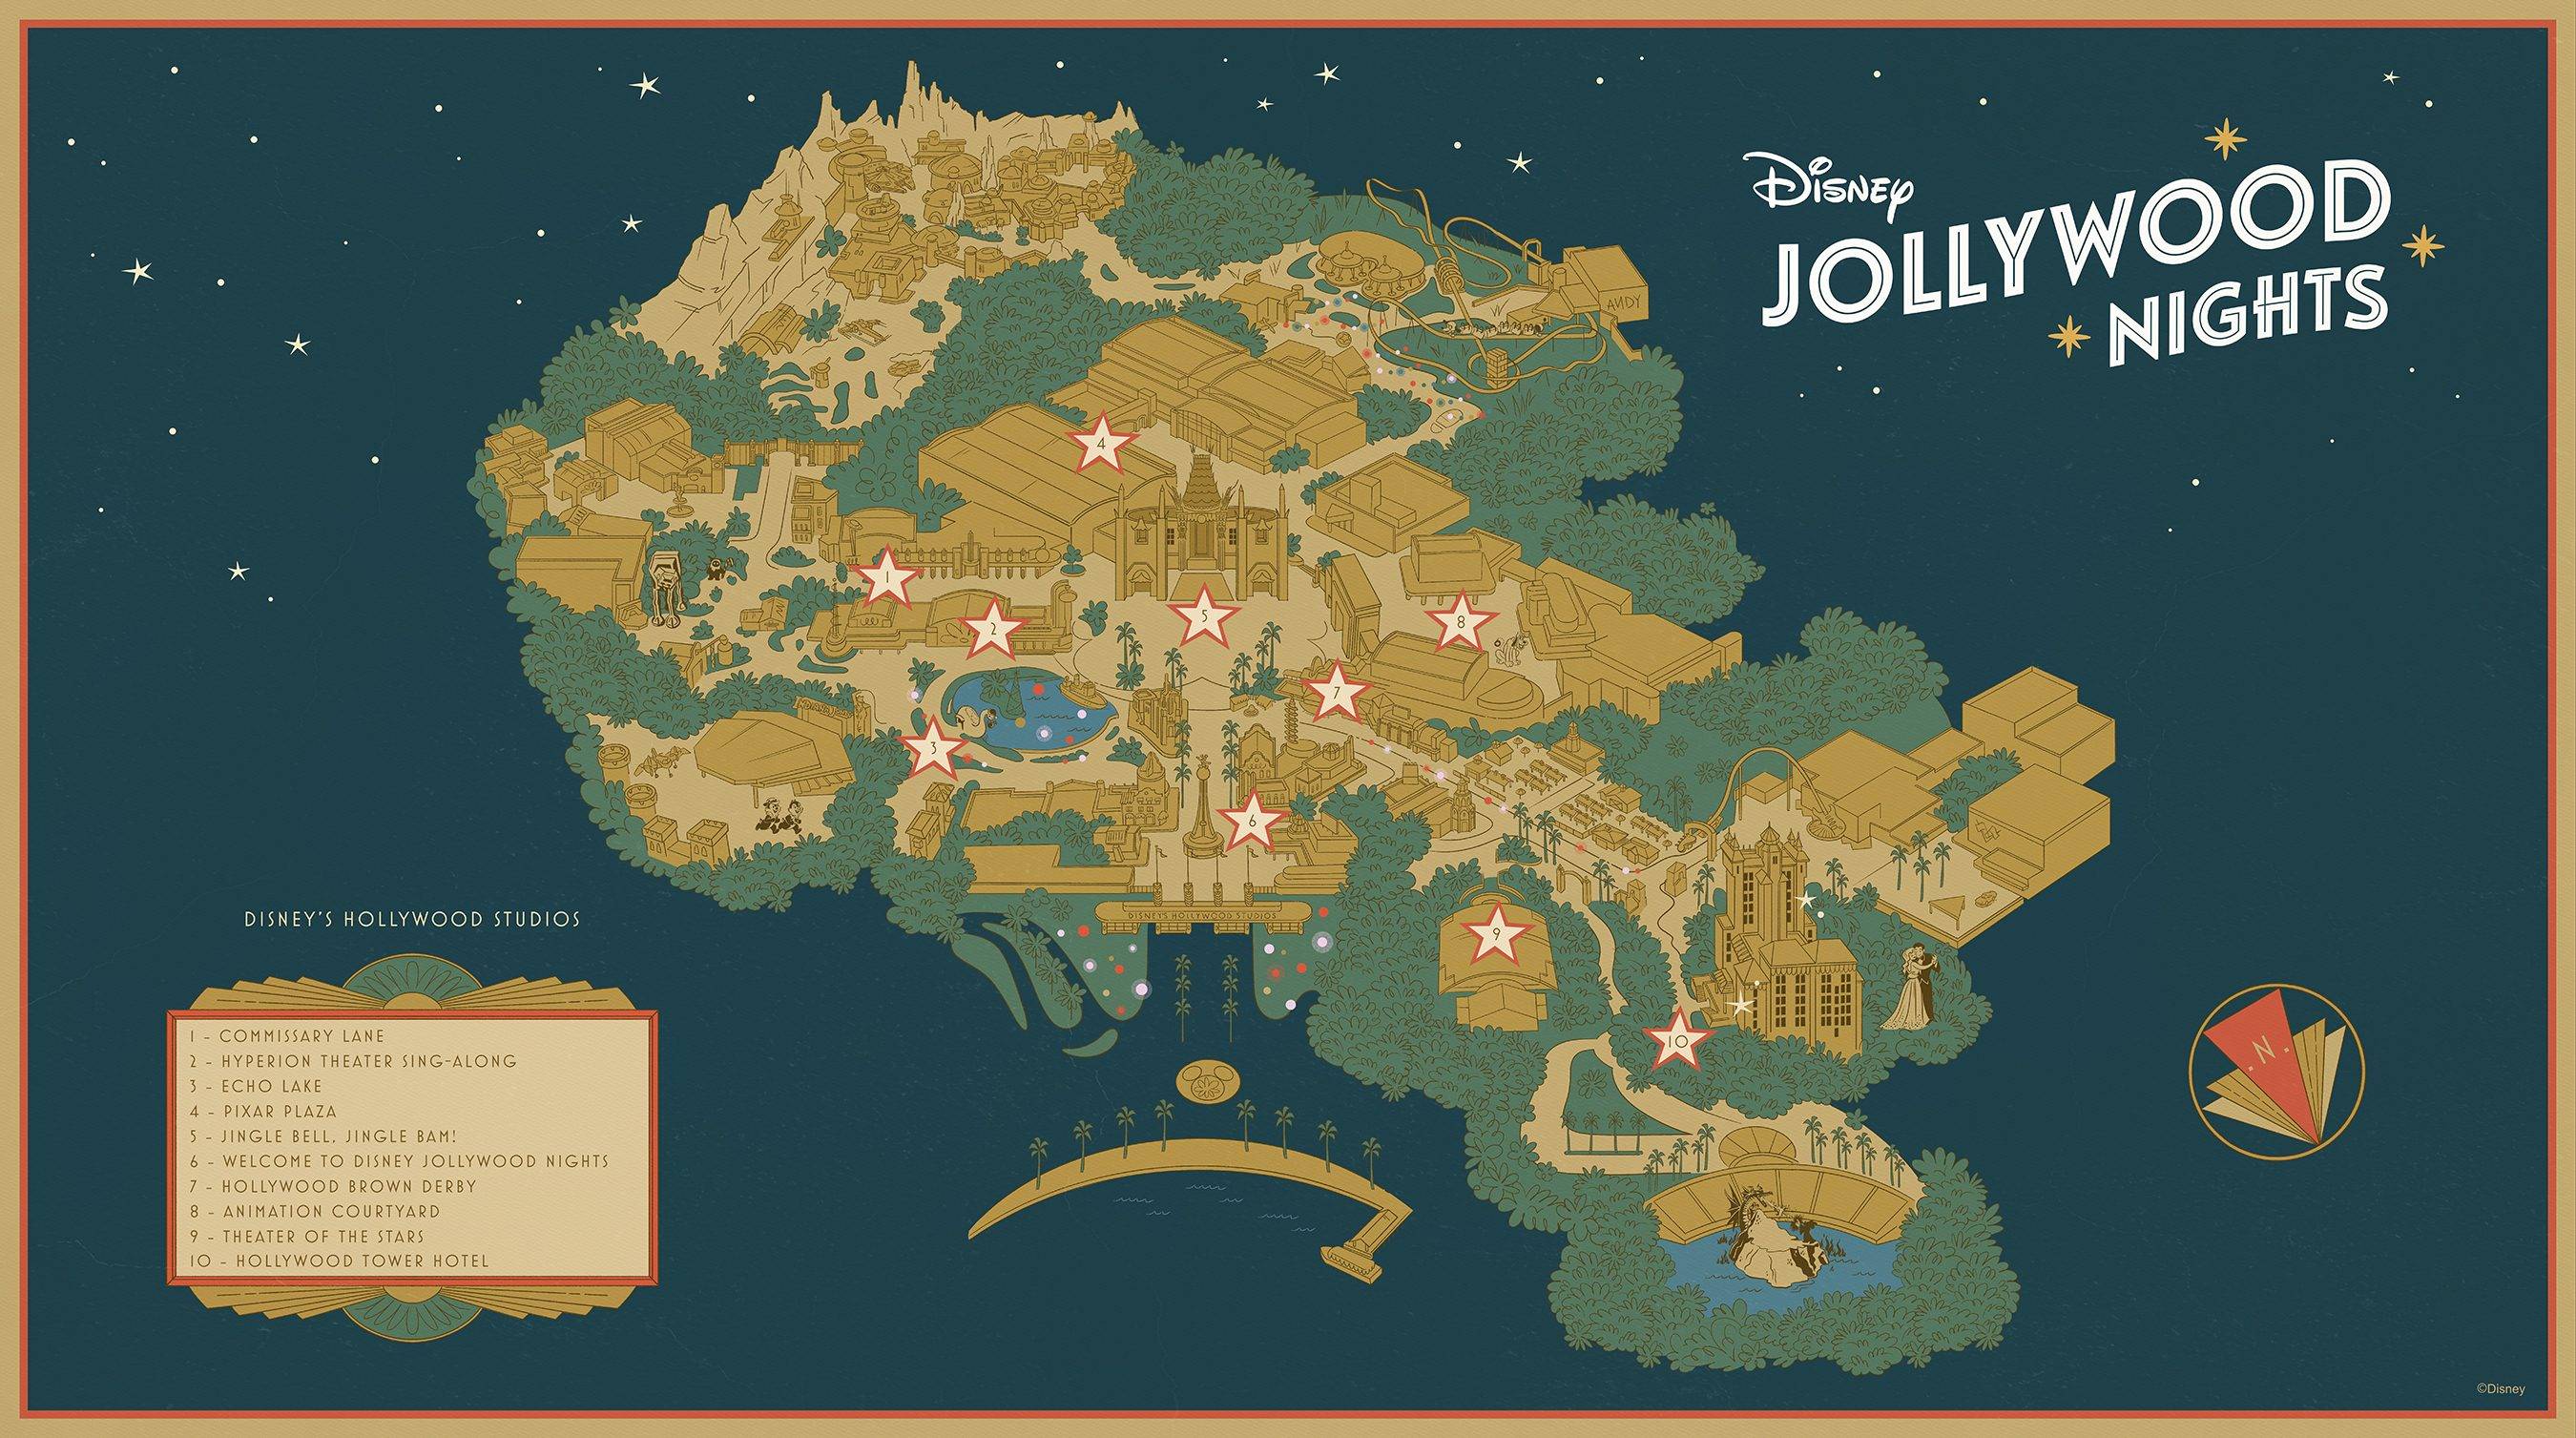 Disney Jollywood Nights overview